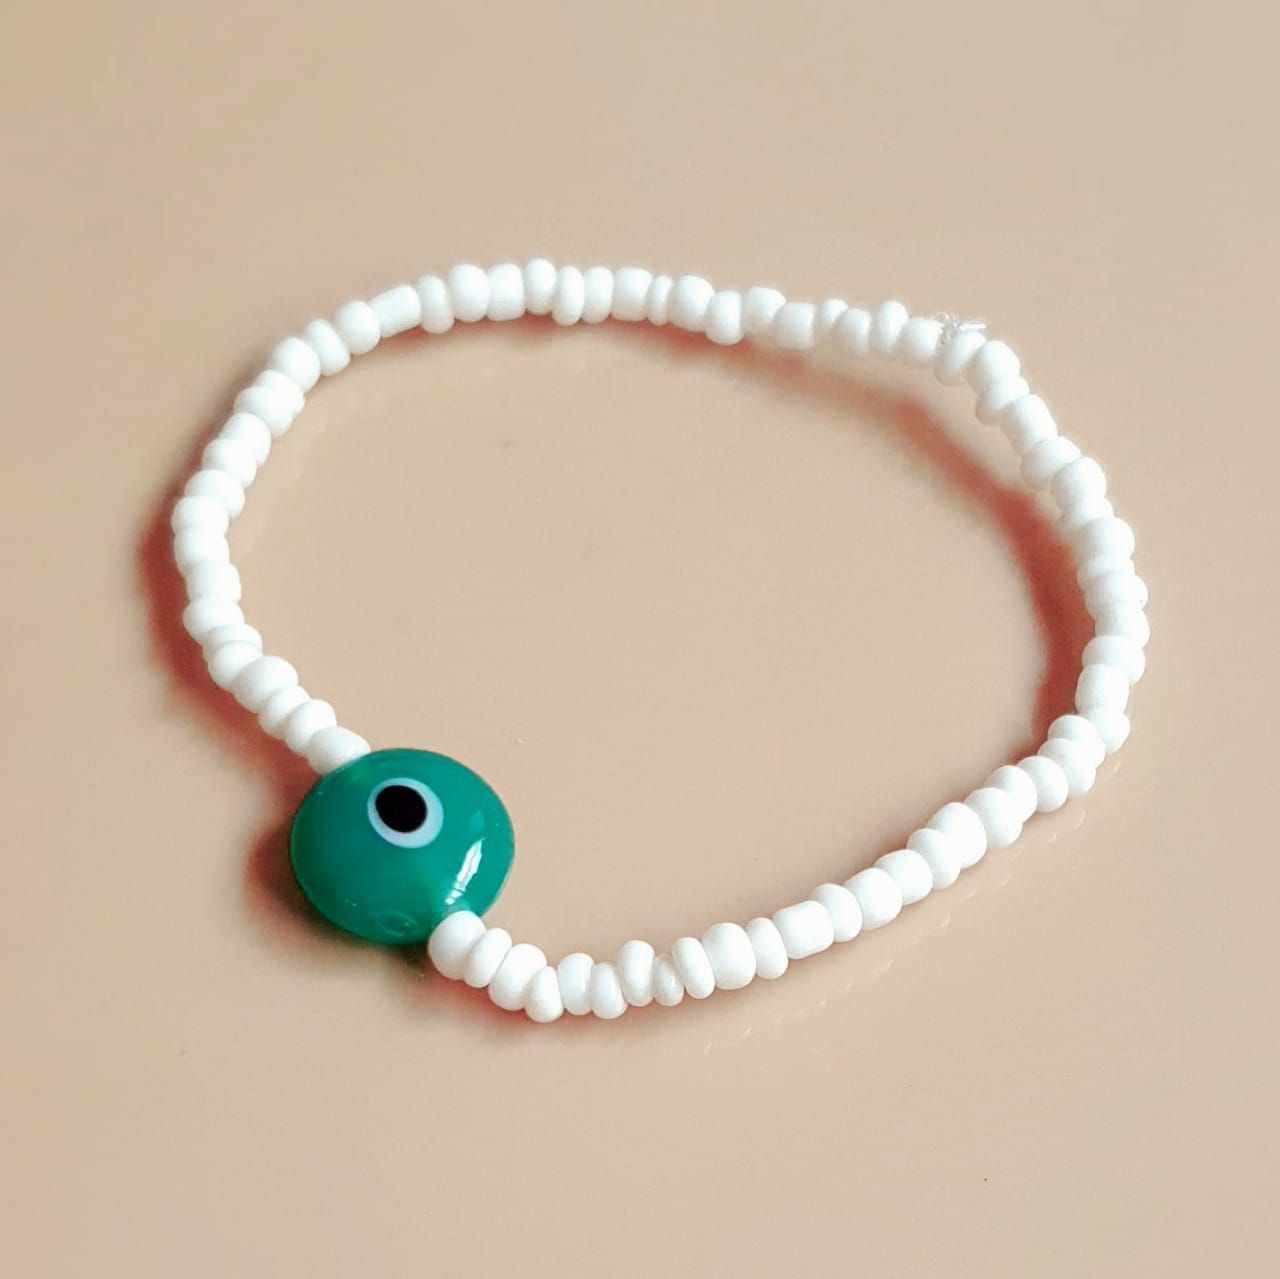 EVIL EYE BRACELET - Get Yours From The Healing Crystal Experts | Healing  Bracelets & Healing Crystal Jewelry